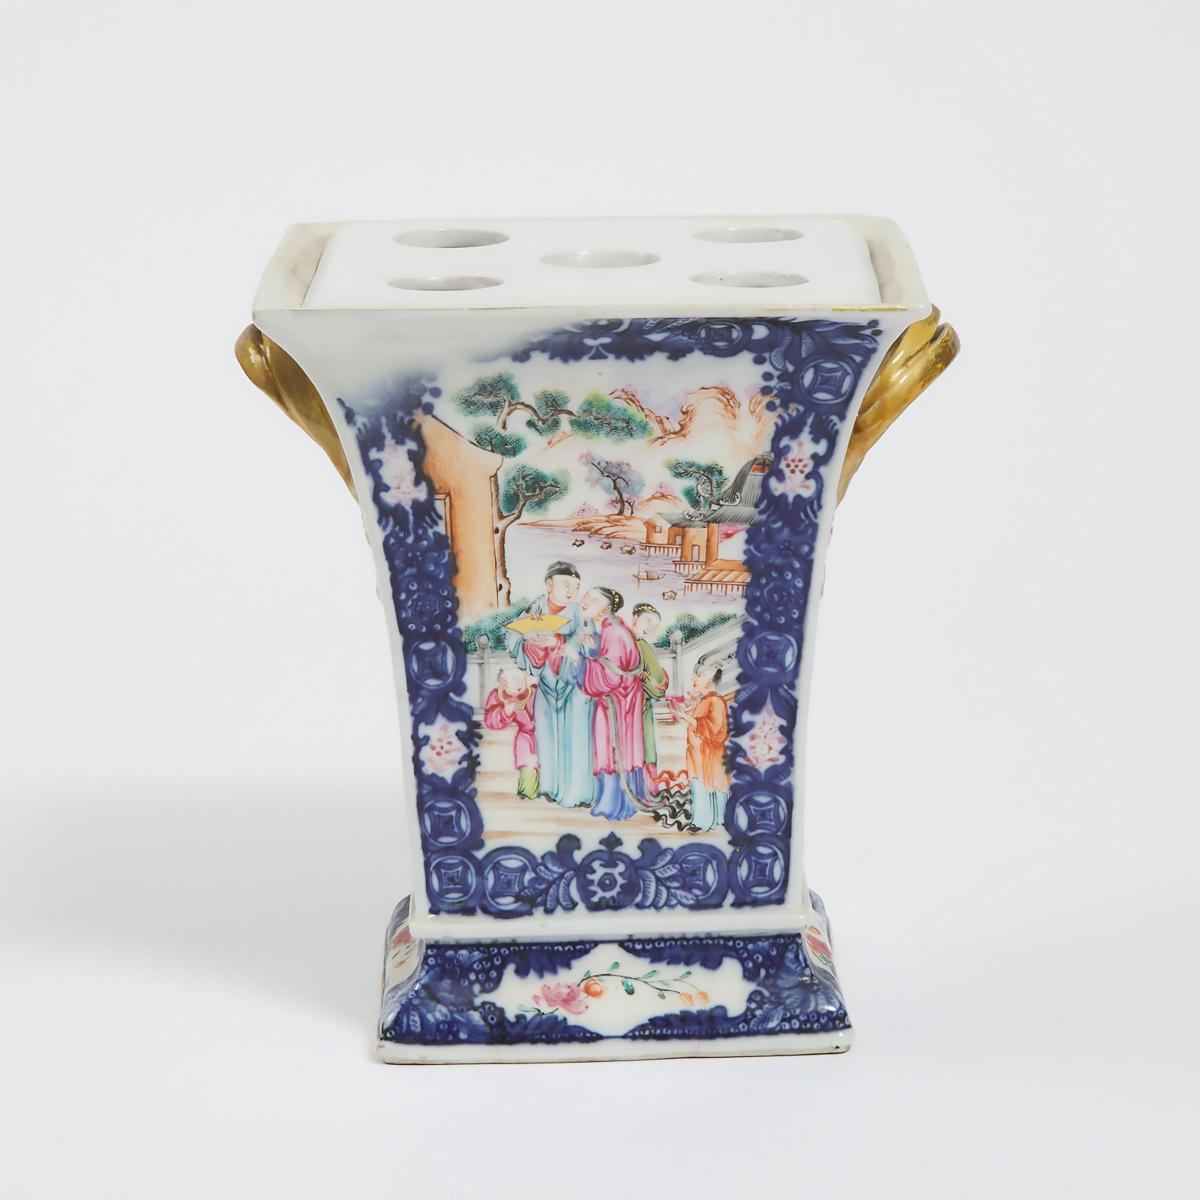 A Chinese Export Blue and White Famille Rose Bough Pot, Late 18th Century, 十八世纪 乾隆外销粉彩人物纹花插, height